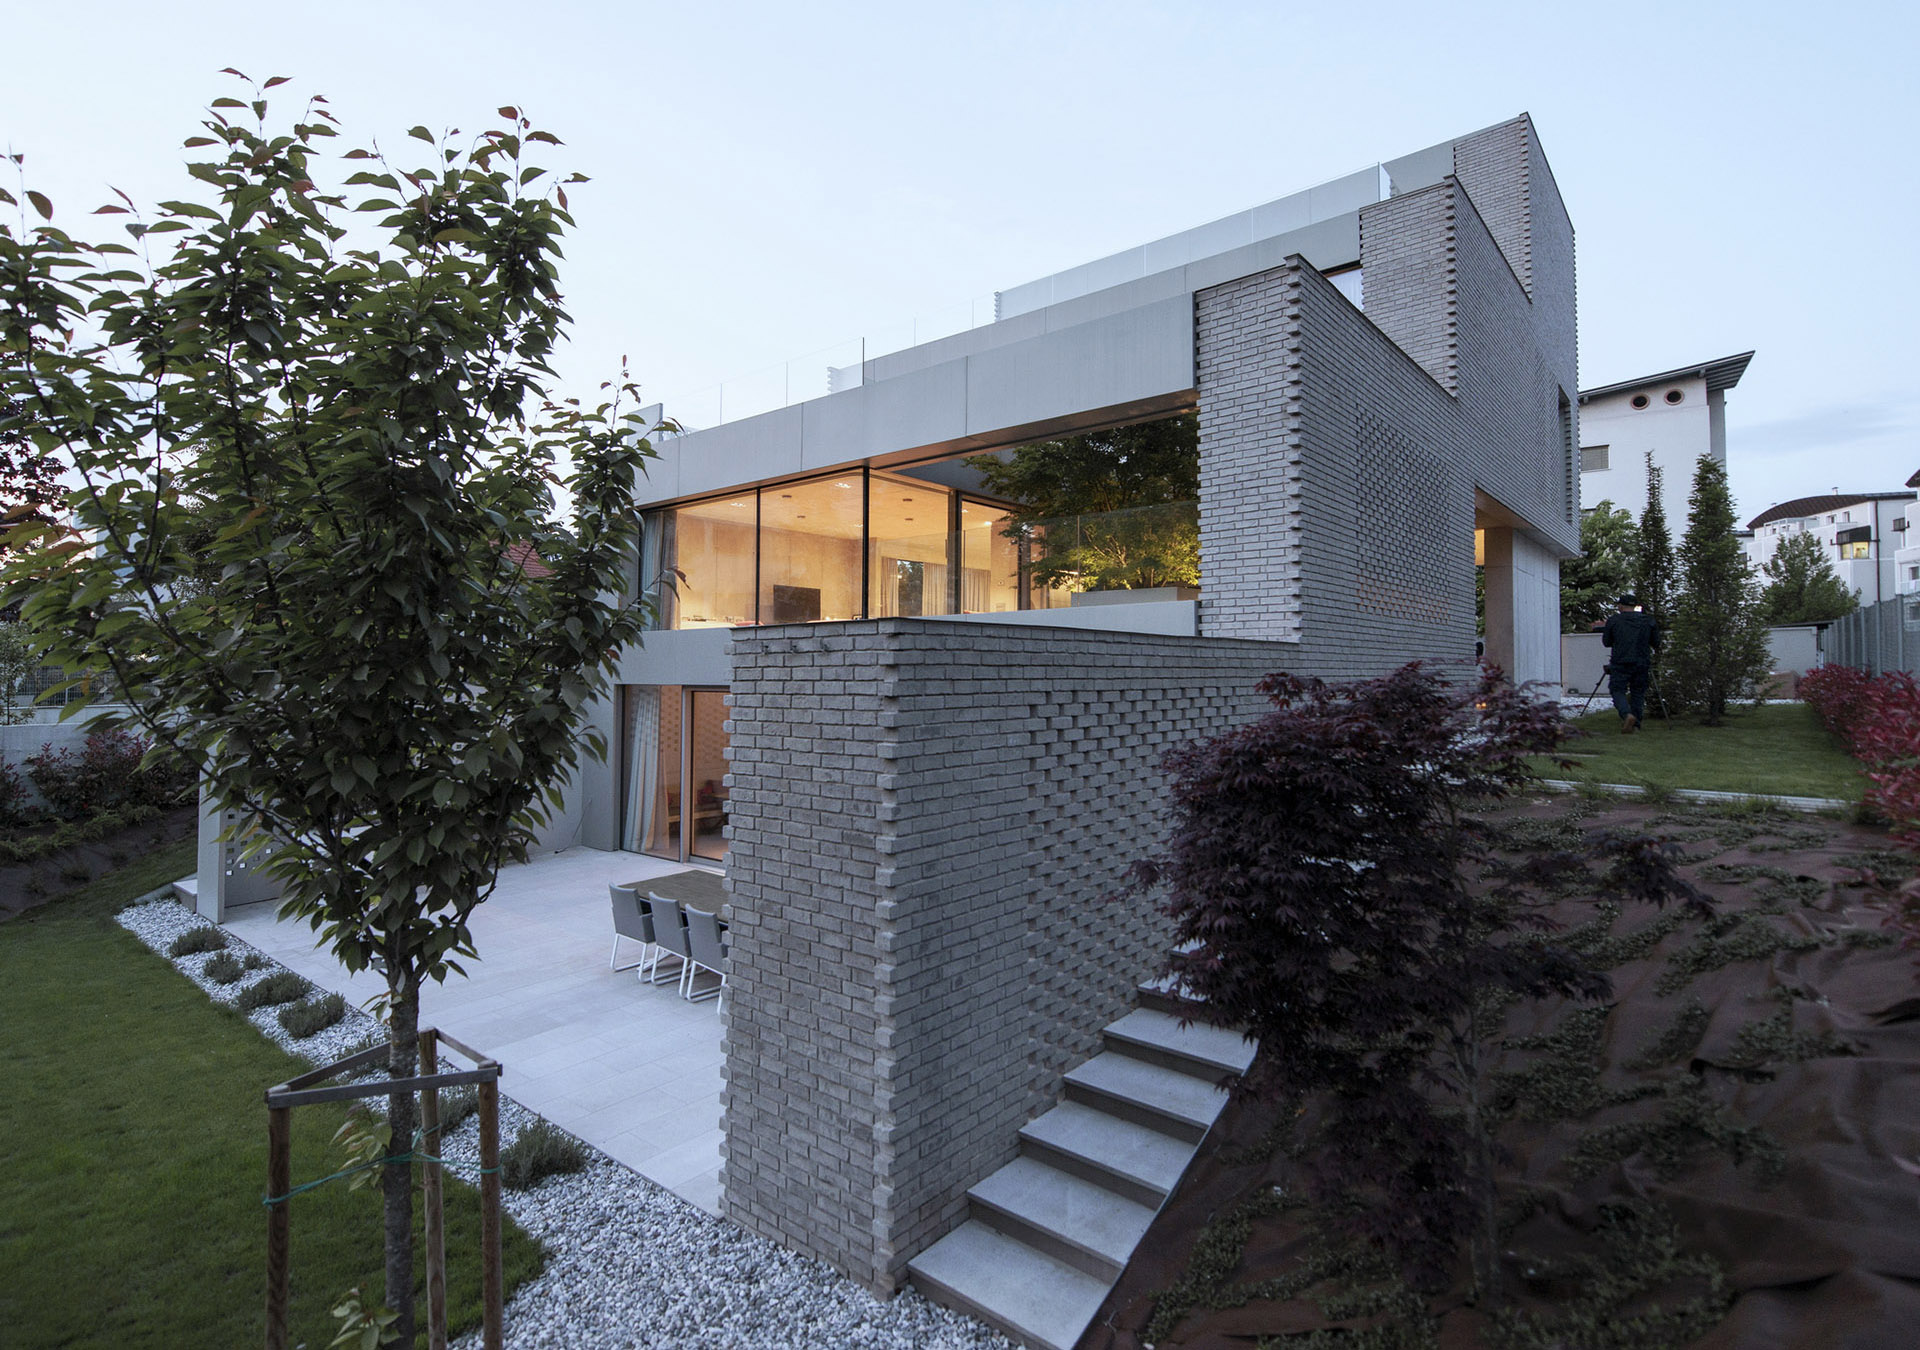 A fabric of perforated bricks surrounds the Step Level House